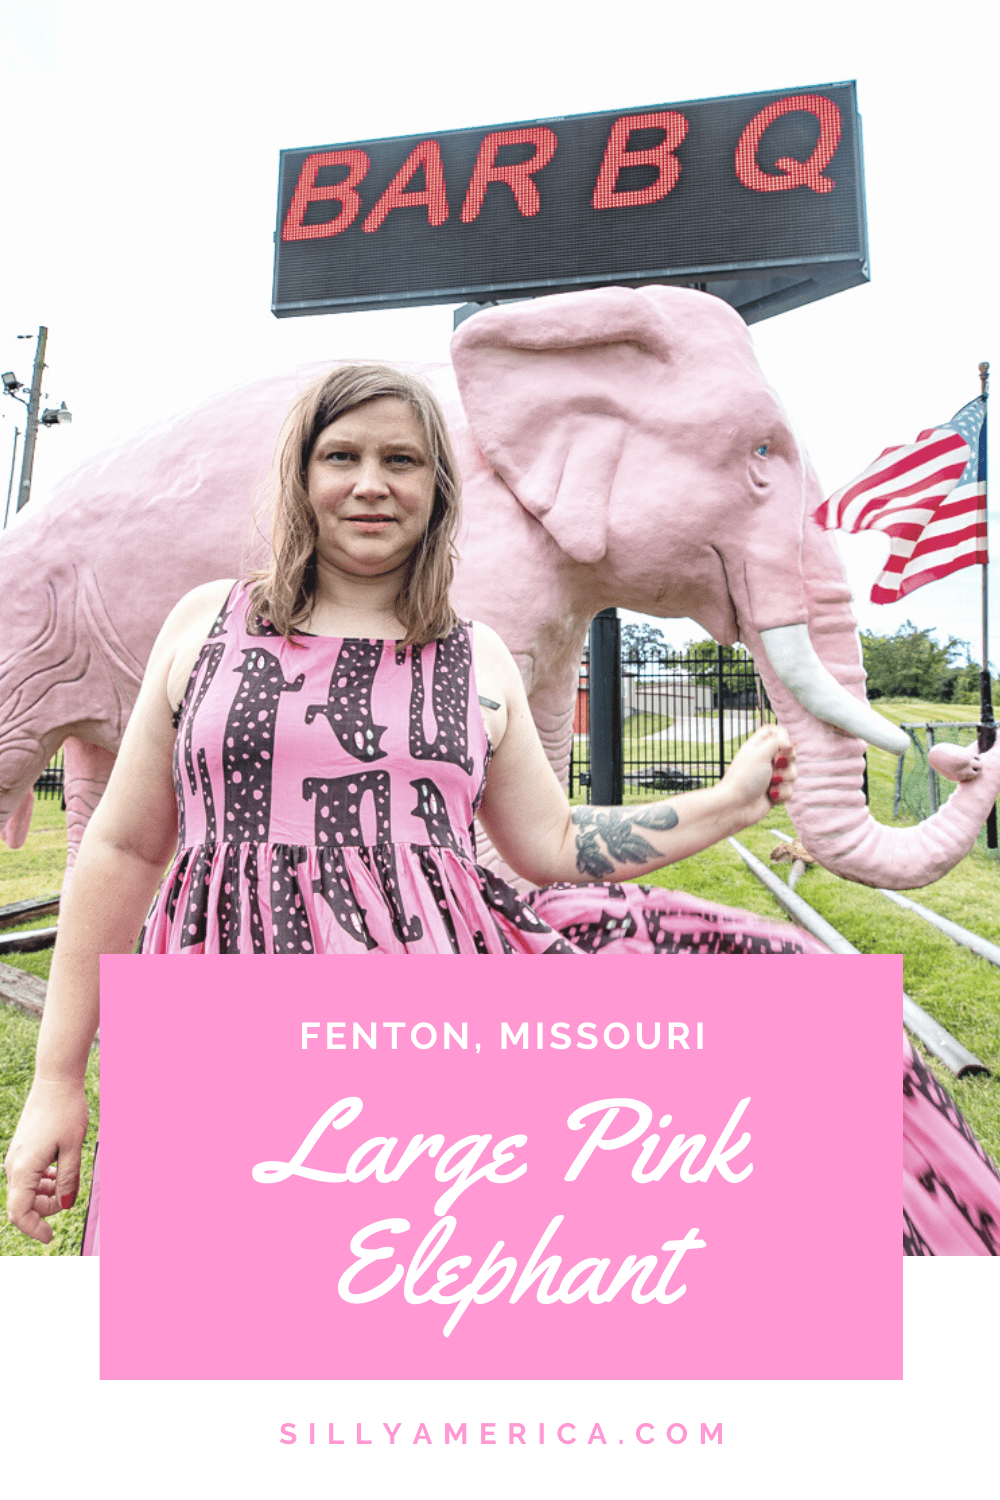 Photos of the big pink elephant outside of a gas station in Fenton, Missouri. These weird roadside attractions share a common theme in many locations in the US. Visit this vintage roadside attraction on a Missouri road trip and be sure to add it to your travel itinerary of things to do in Missouri and bucket lists. #MissouriRoadsideAttractions #MissouriRoadsideAttraction #RoadsideAttractions #RoadsideAttraction #RoadTrip #MissouriRoadTrip  #MissouriTravelRoadTrip #WeirdRoadsideAttractions